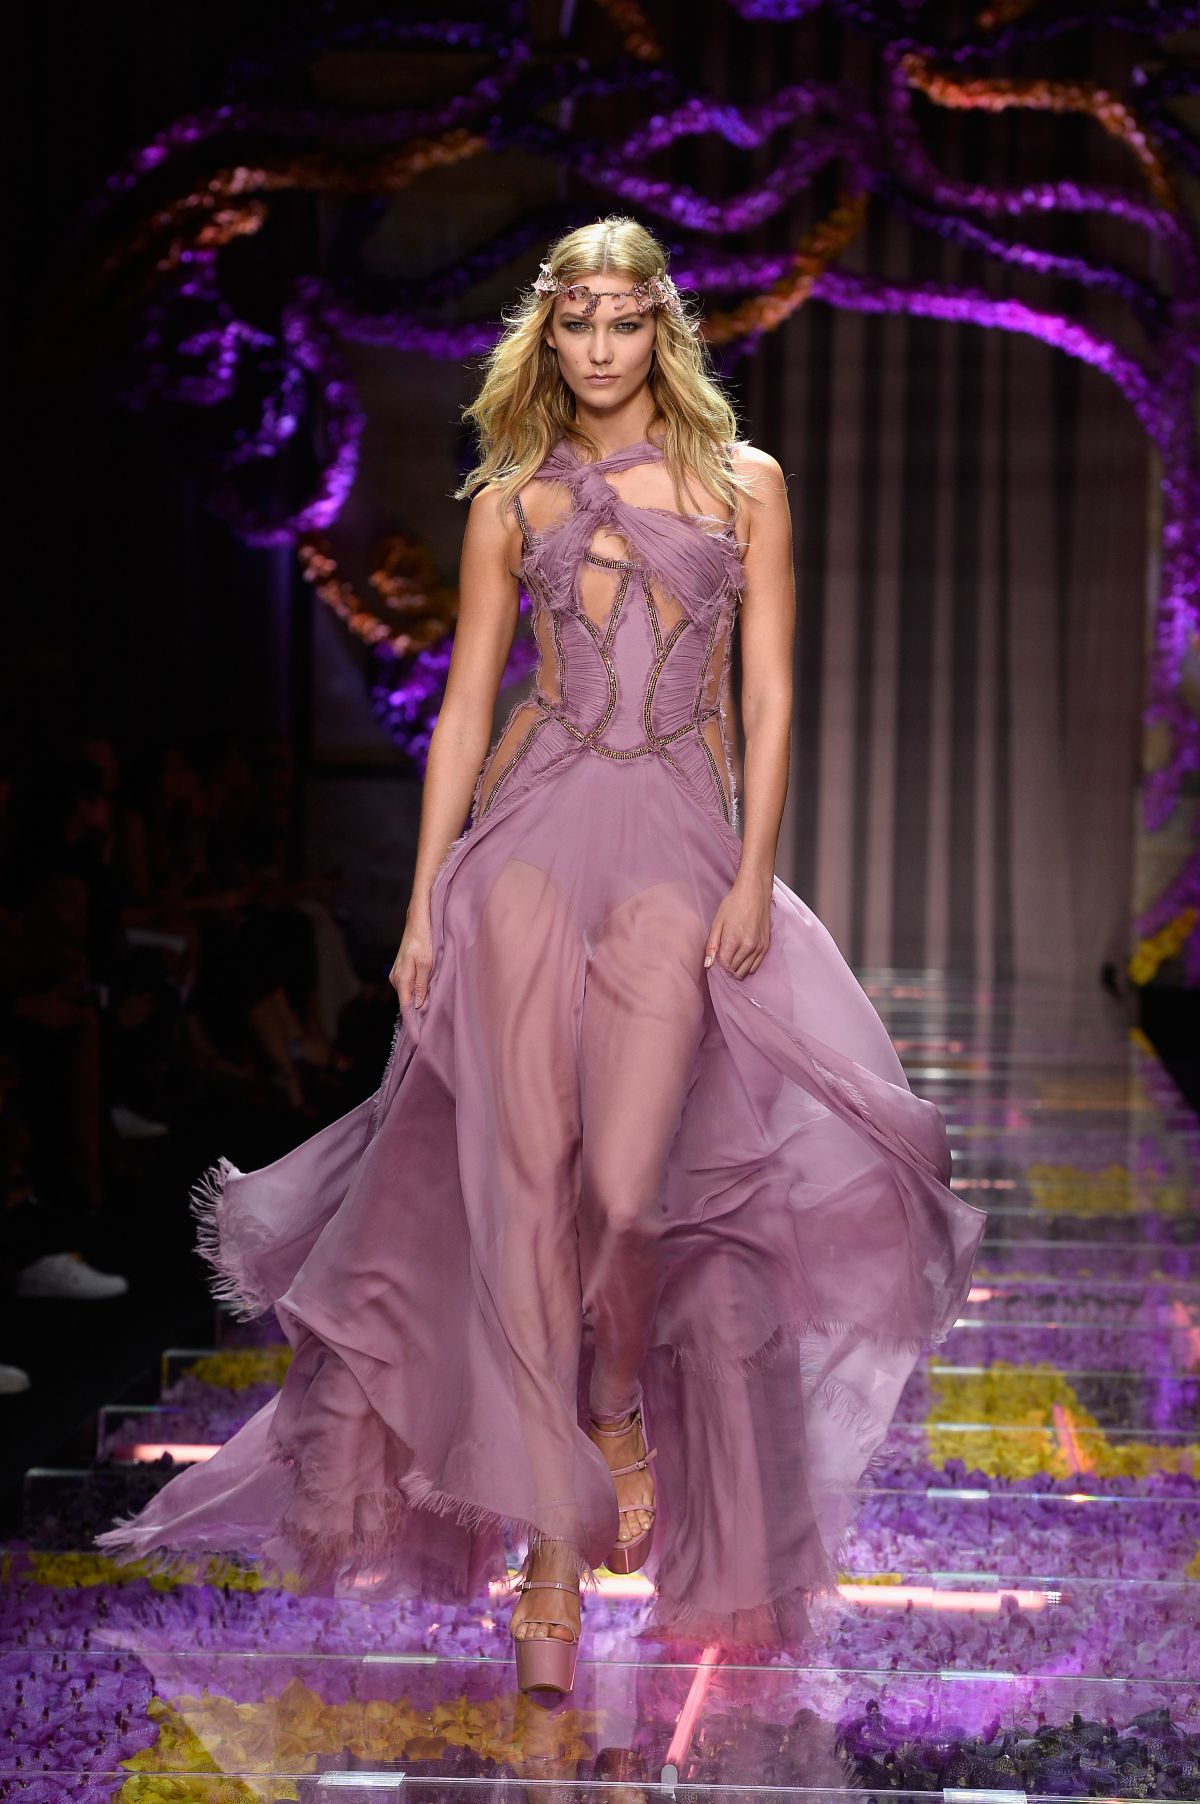 KARLIE KLOSS on the Runway of Atelier Versace Fashion Show in Paris ...